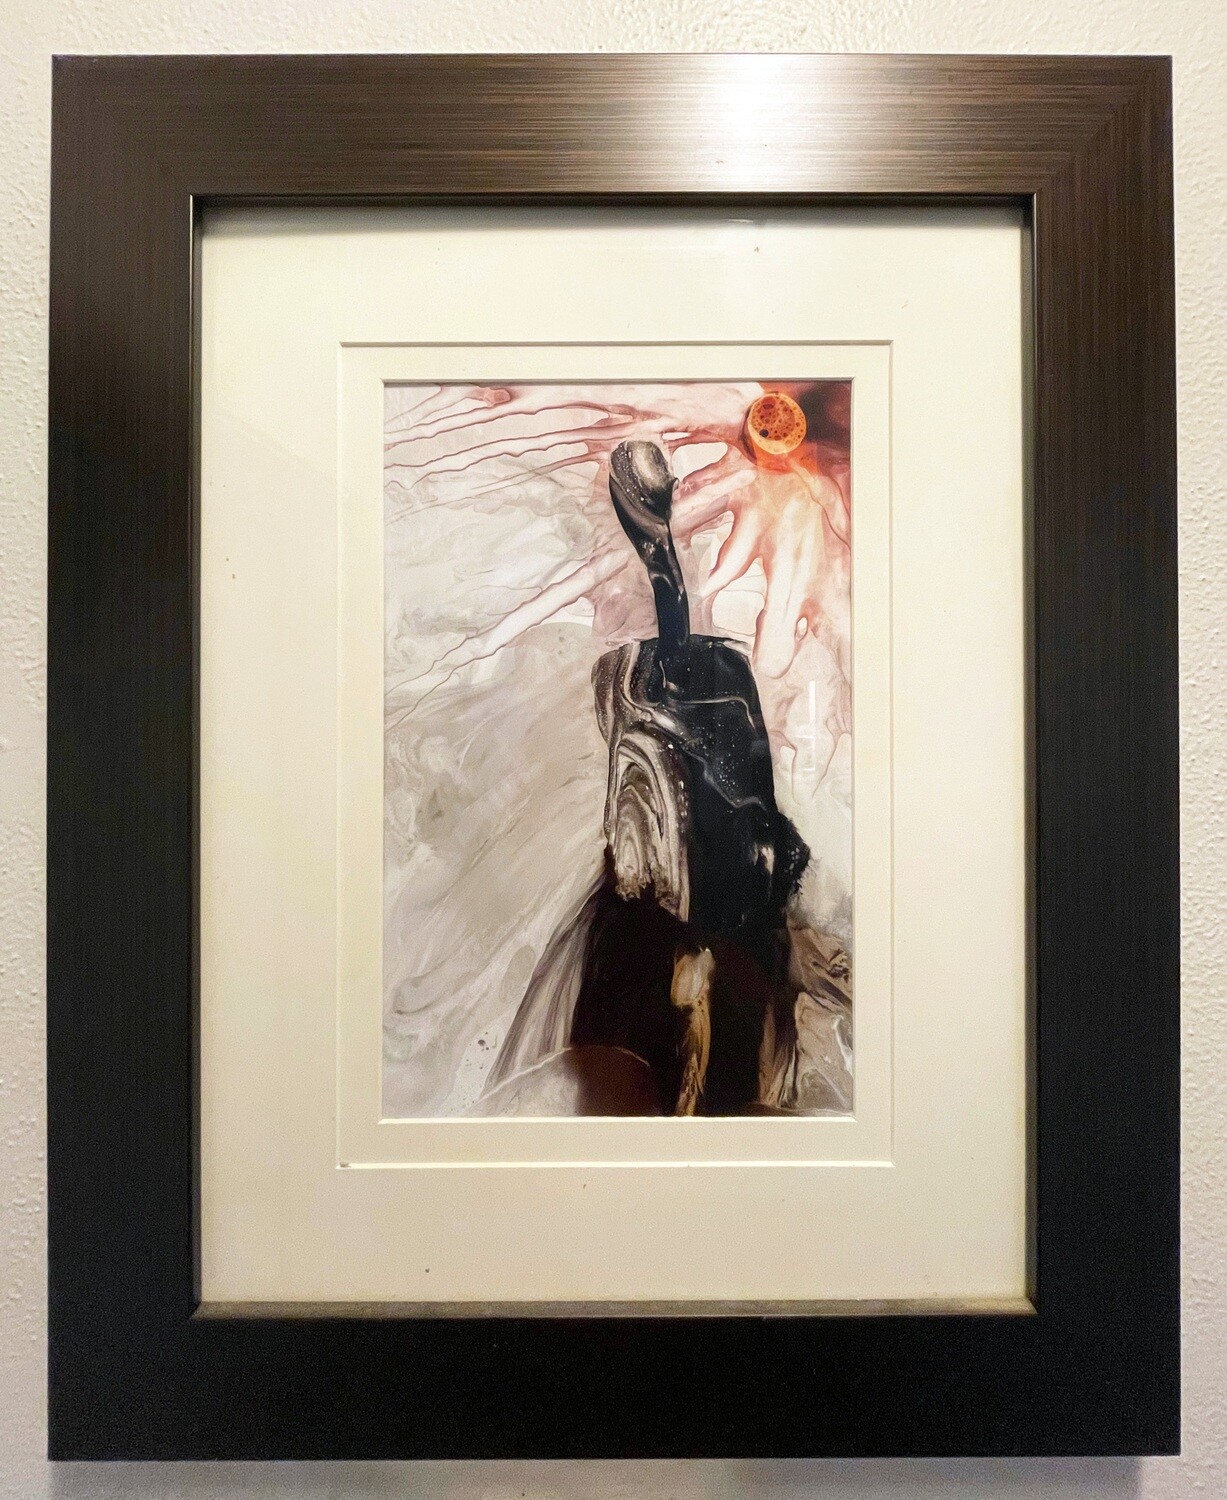 Jose Tonito Original painting on paper.FRAMED"Figure"Unique wonderful art. Published and exhibited.